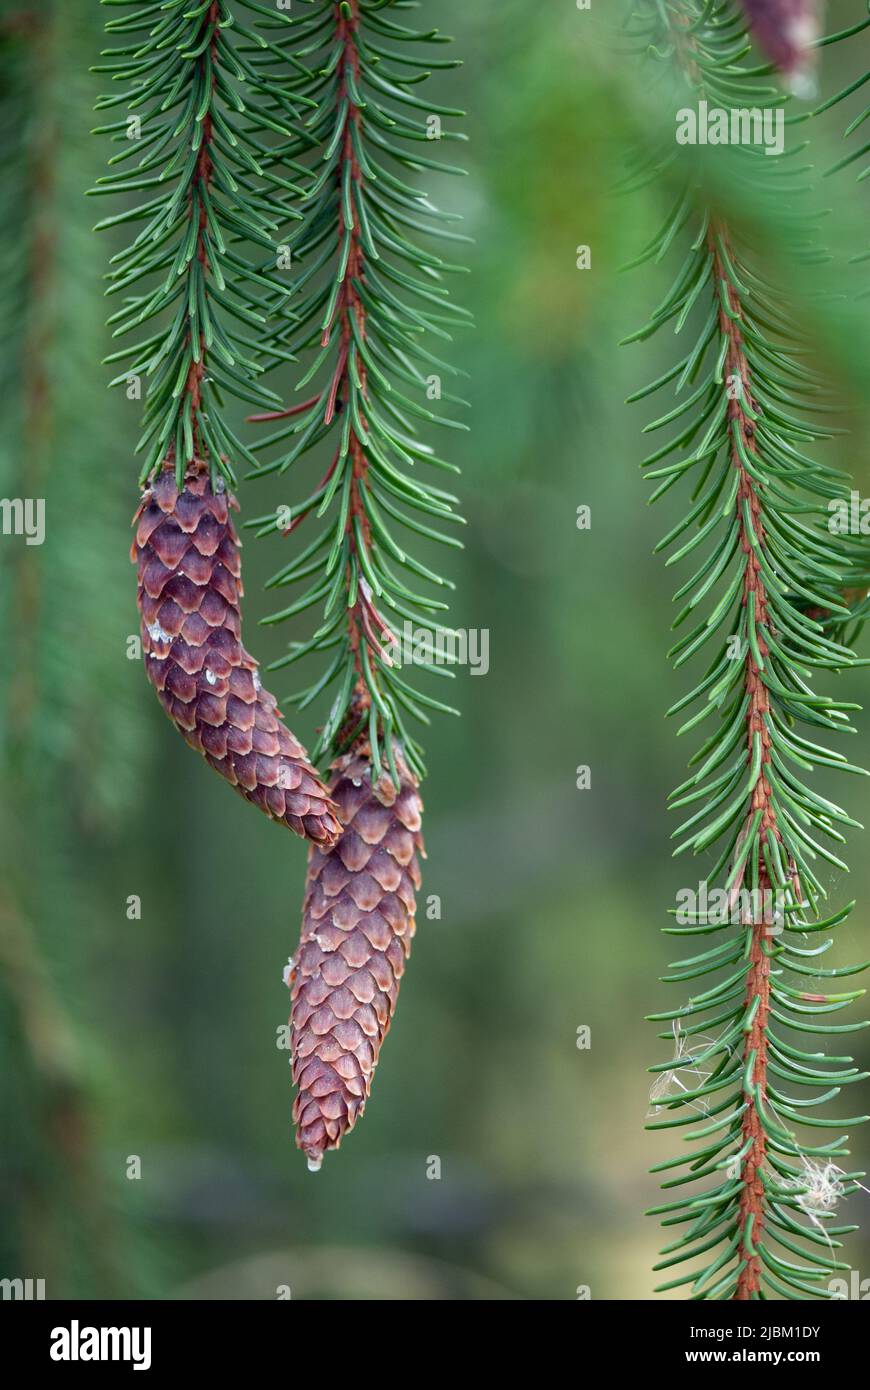 Weeping Norway Spruce (Picea abies f. pendula) branch with cones. Stock Photo